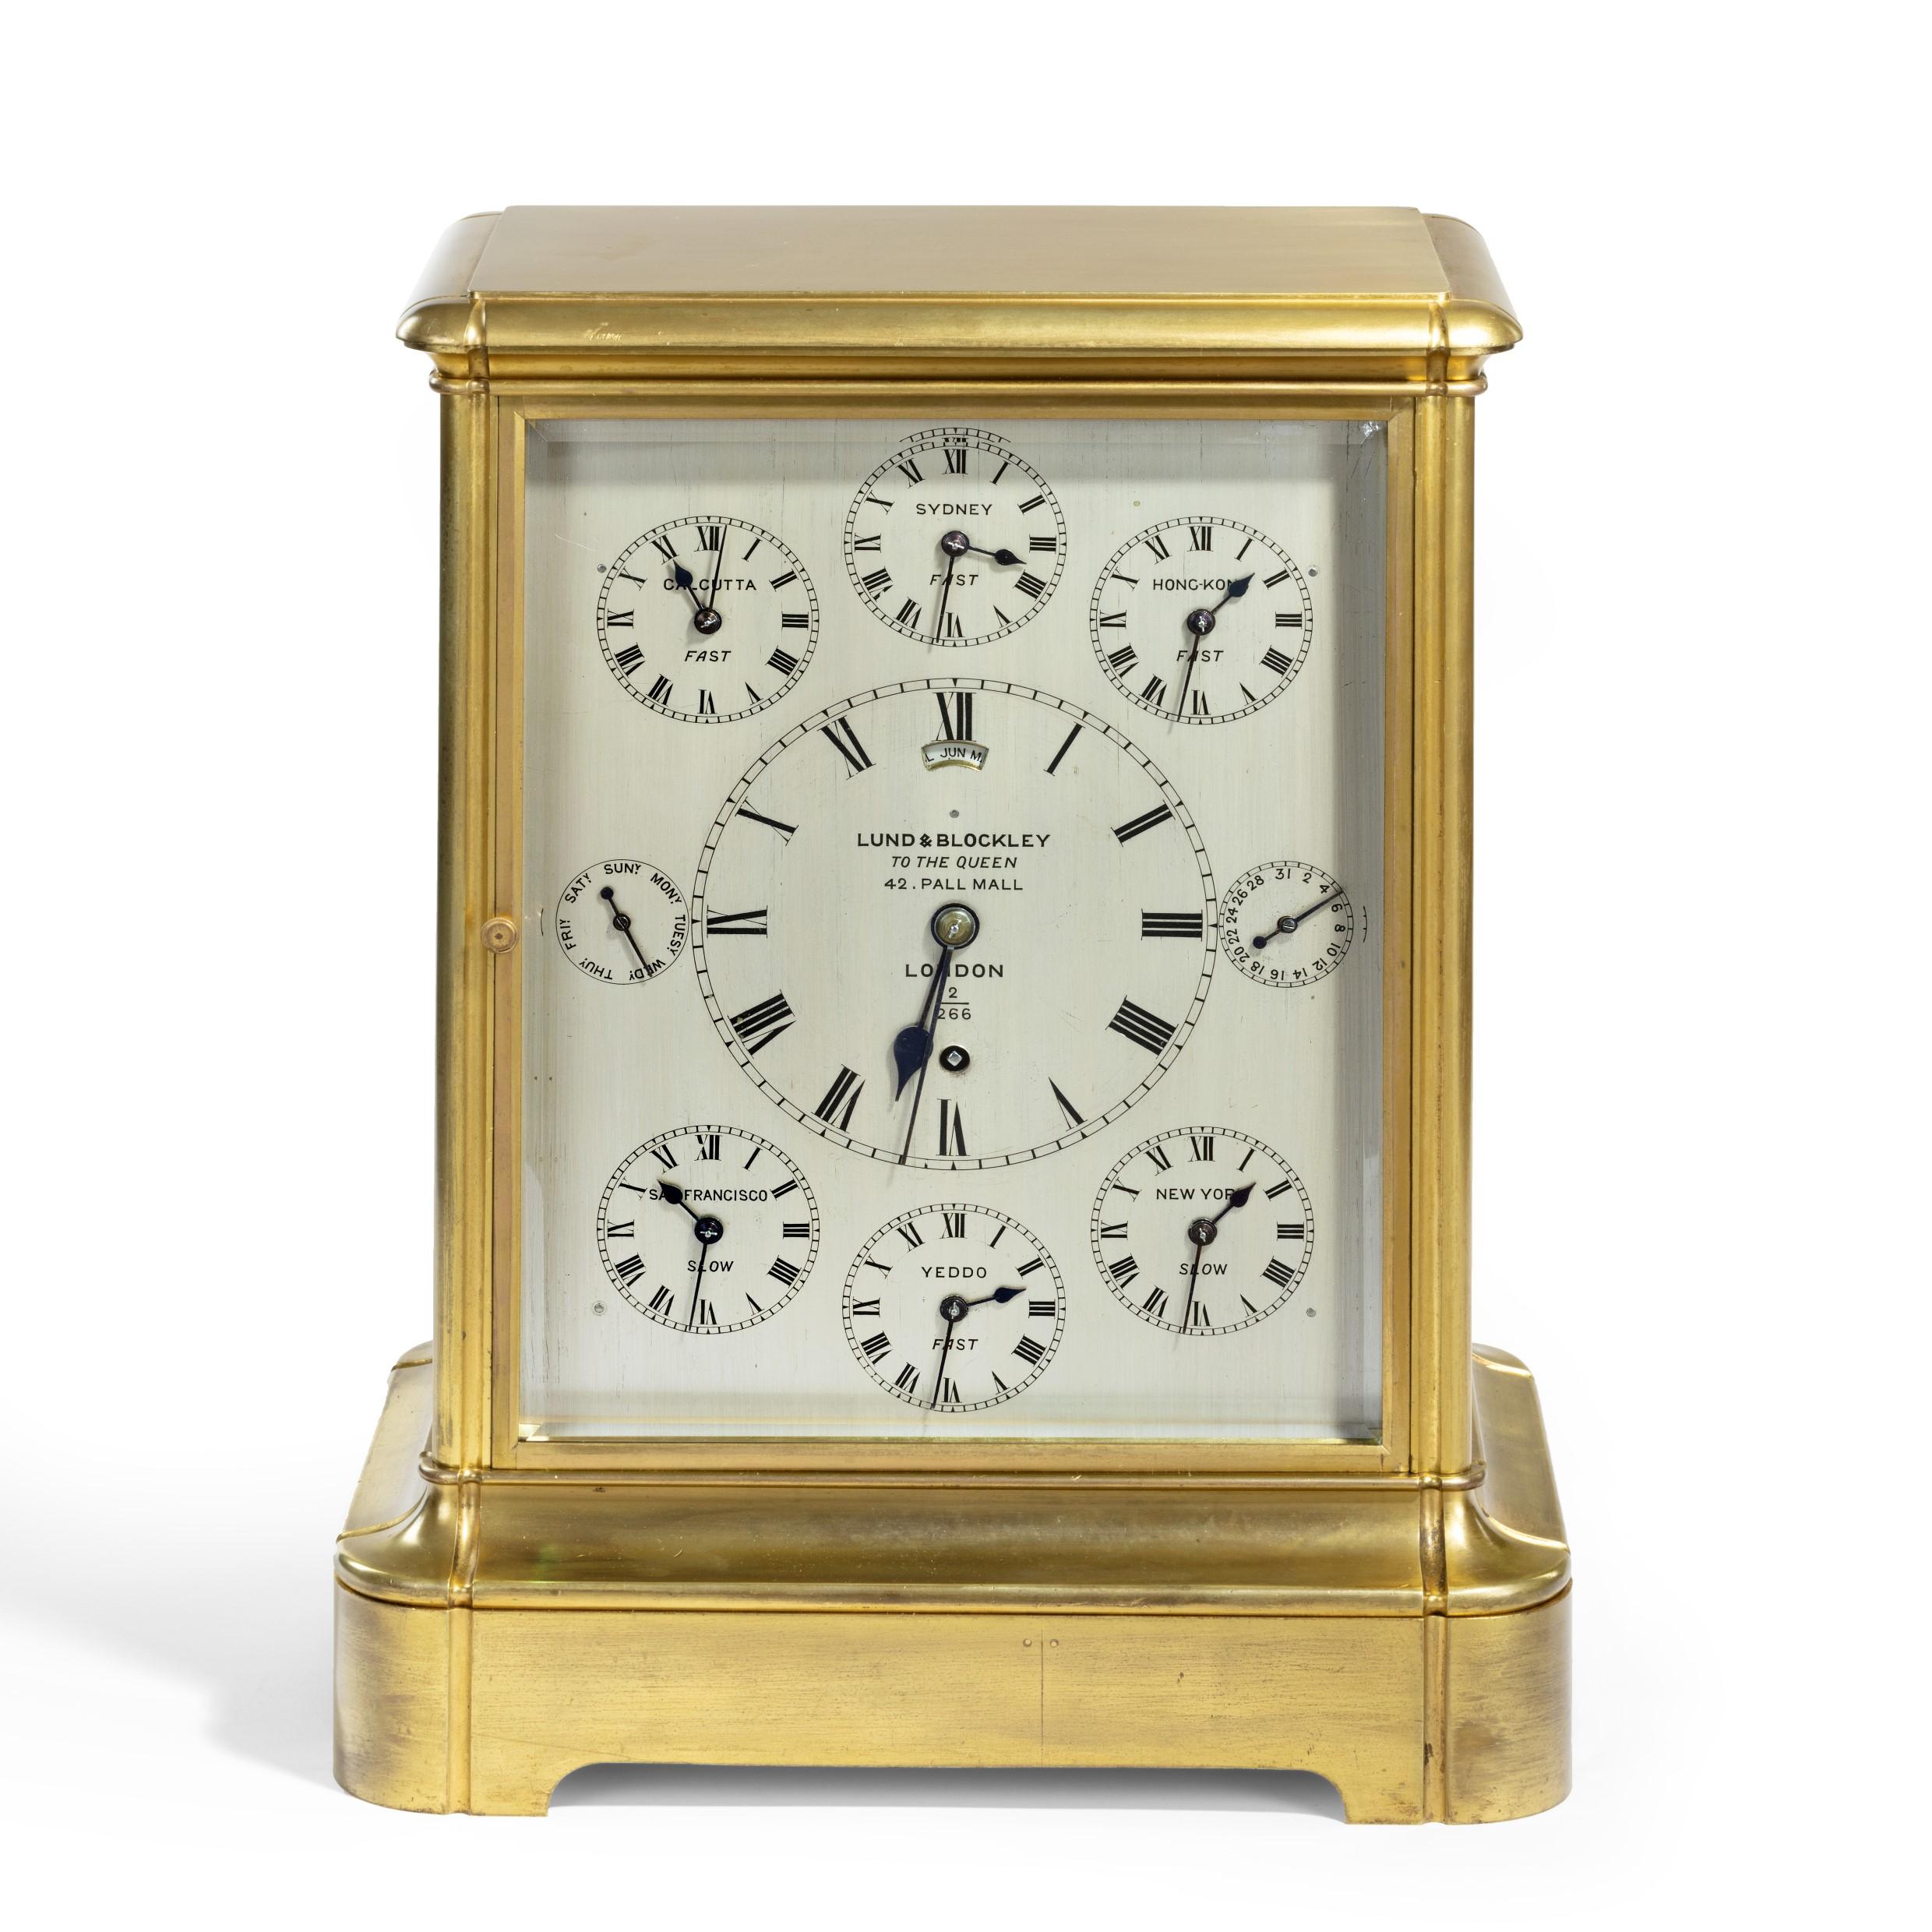 A fine and rare giant English four glass table regulator with World Time dial and Perpetual Calendar by Lund & Blockley, 
the rectangular silvered dial with world time indication on the main dial for London with six subsidiary dials for Calcutta